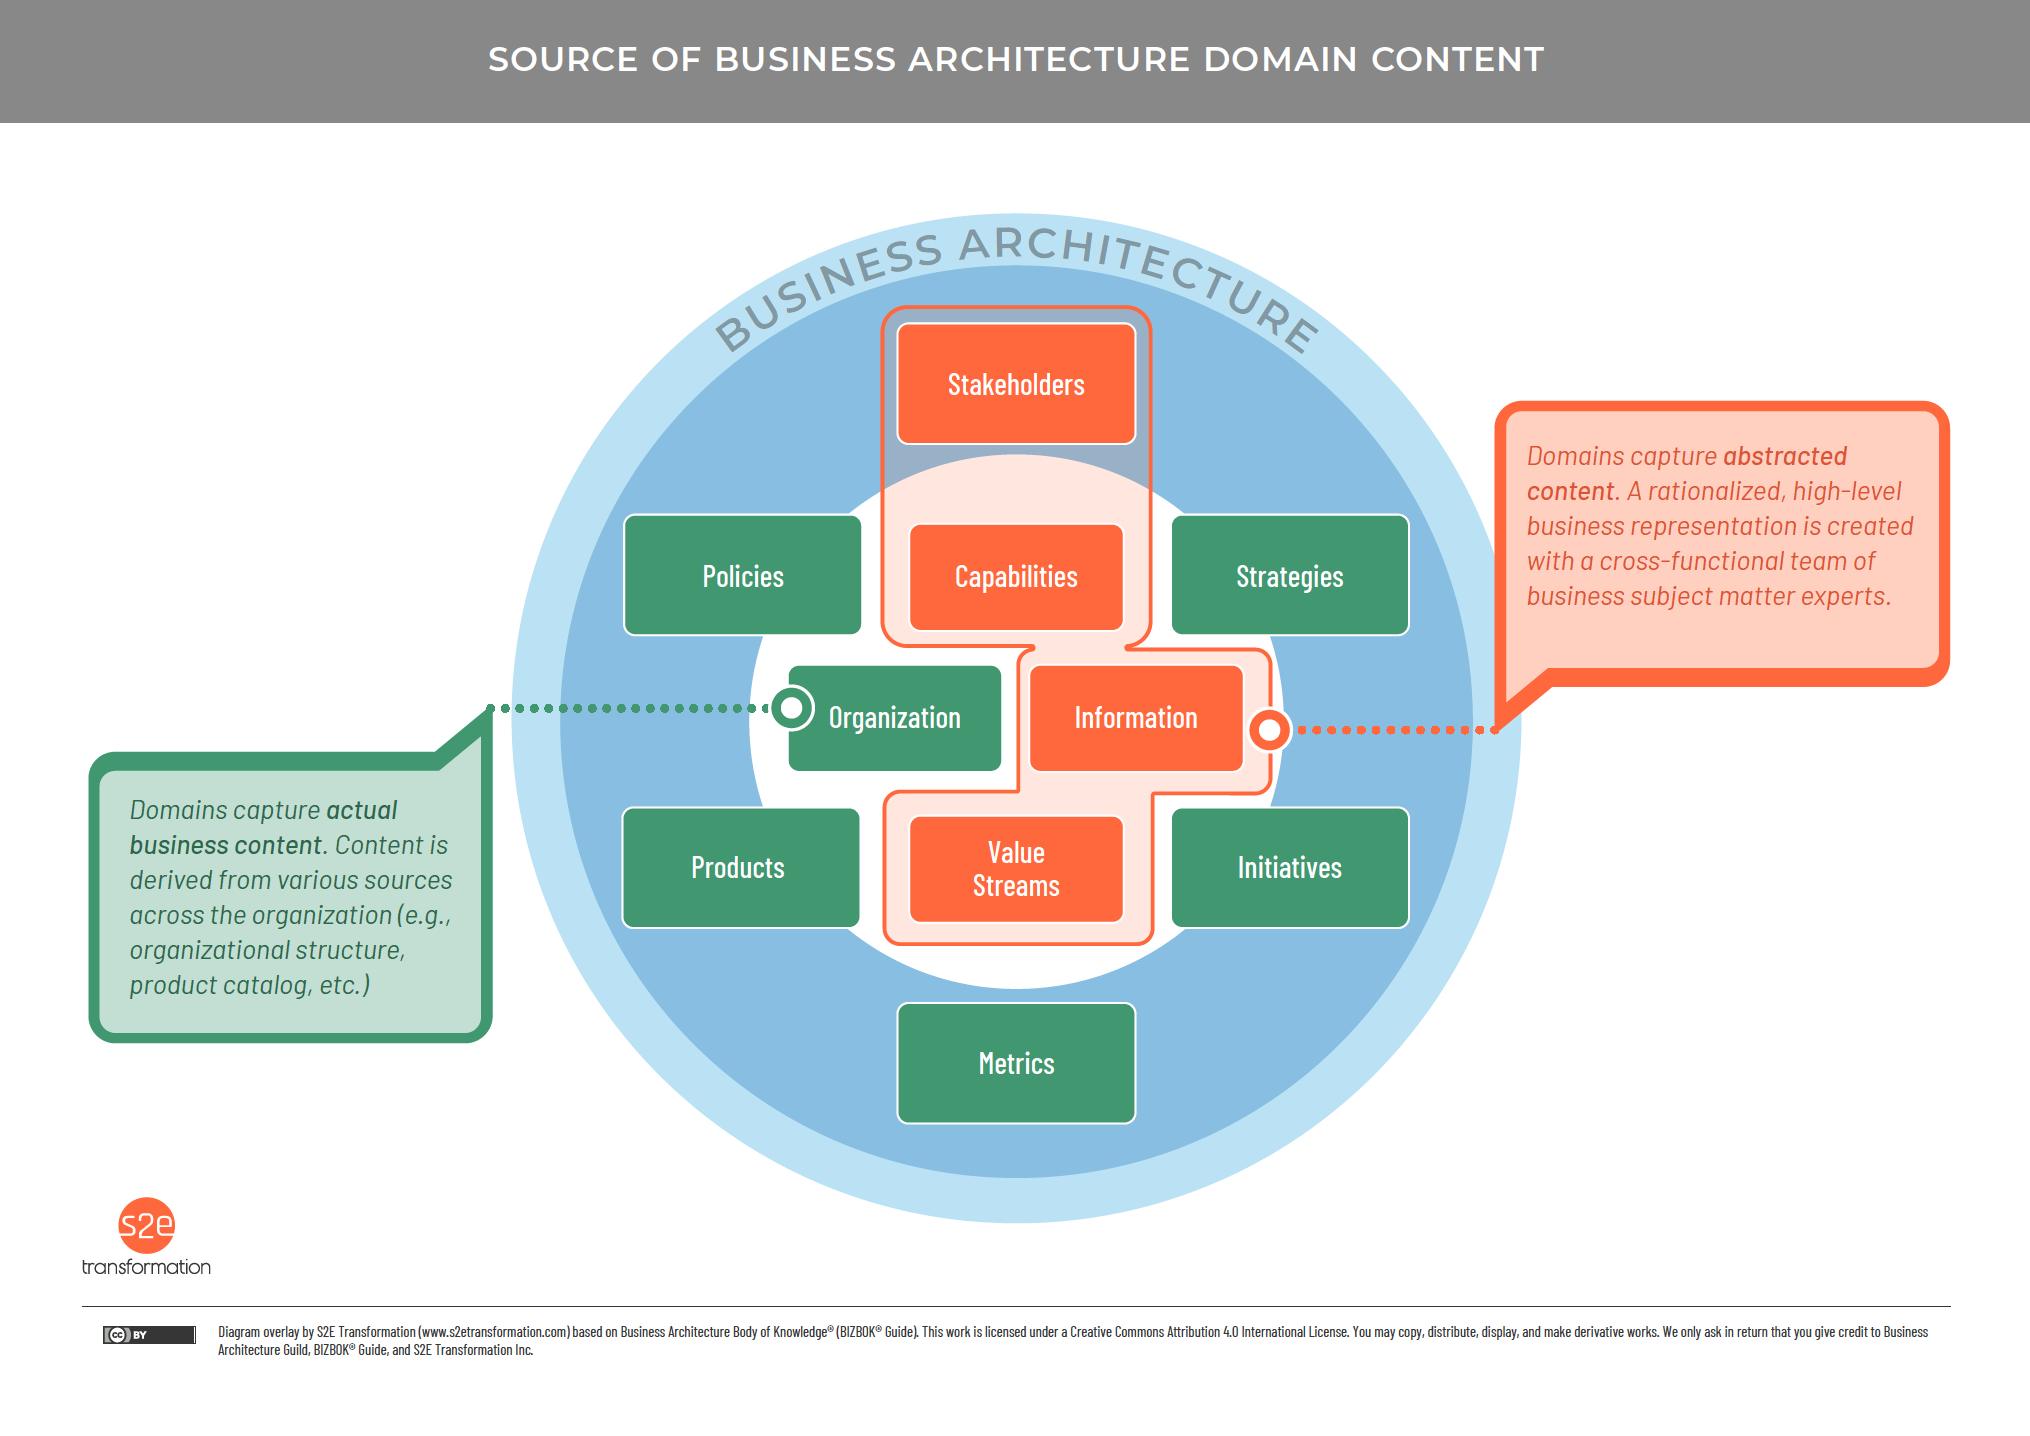 orange box represent domains that are absracted content within business architecture; green boxes represent domains of actual business content